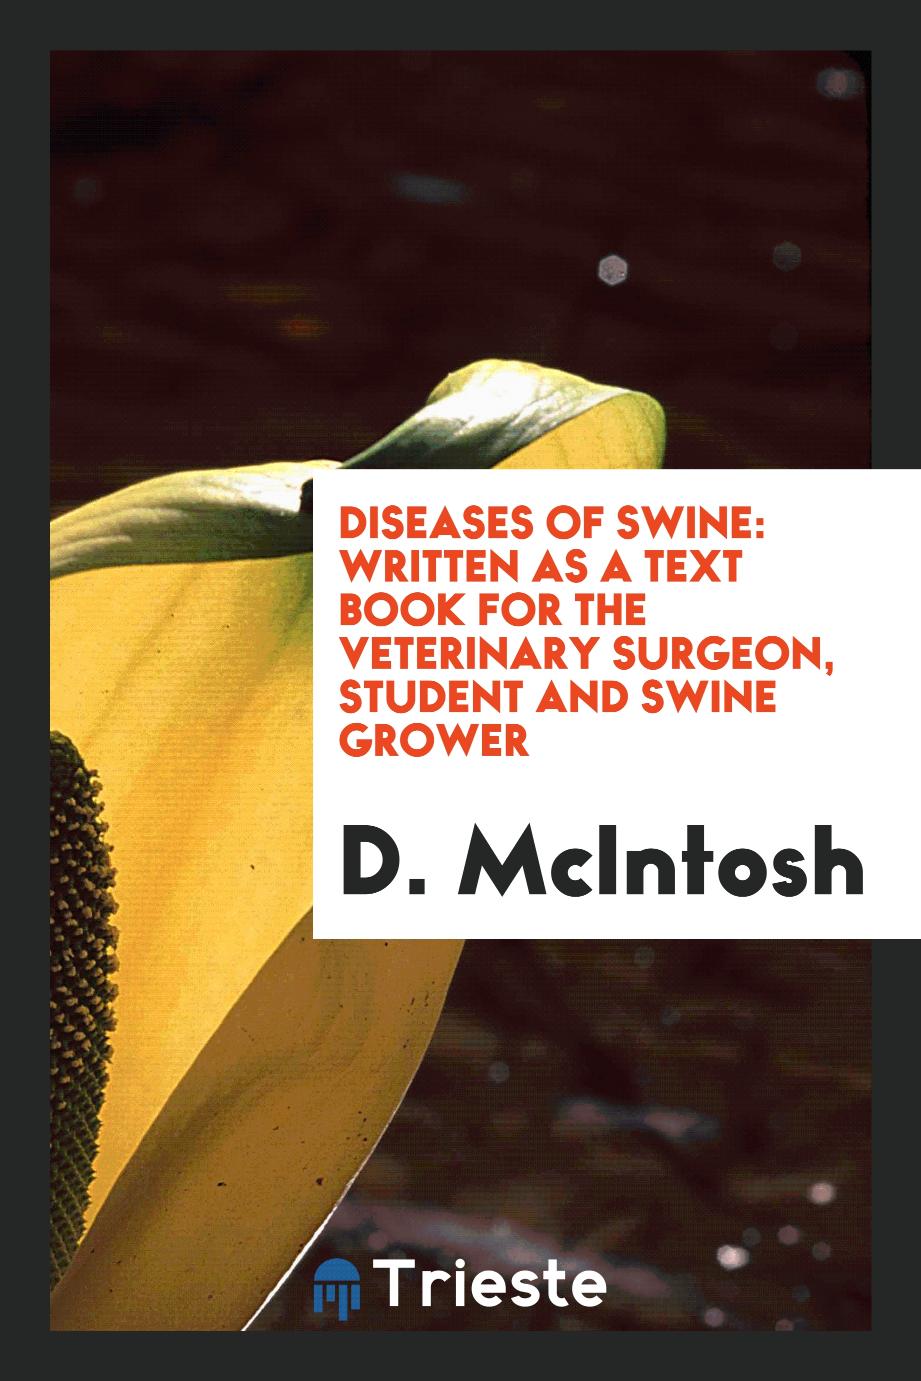 Diseases of swine: written as a text book for the veterinary surgeon, student and swine grower